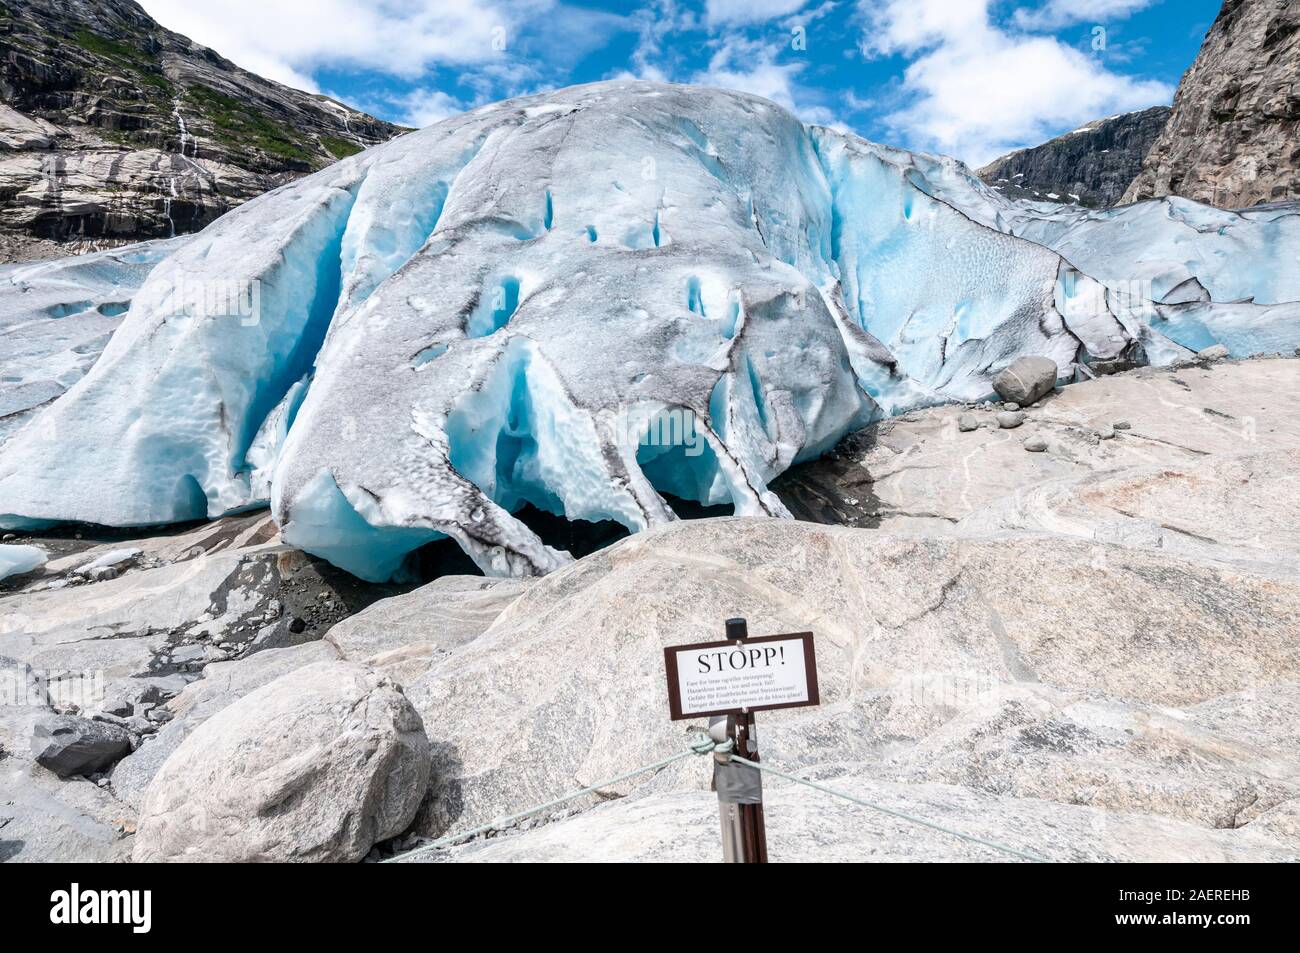 Blue ice, crevasses, glacier tongue Nigardsbre, an offshoot of the Jostedalsbreen, end of the Jostedal valley, Norway Stock Photo